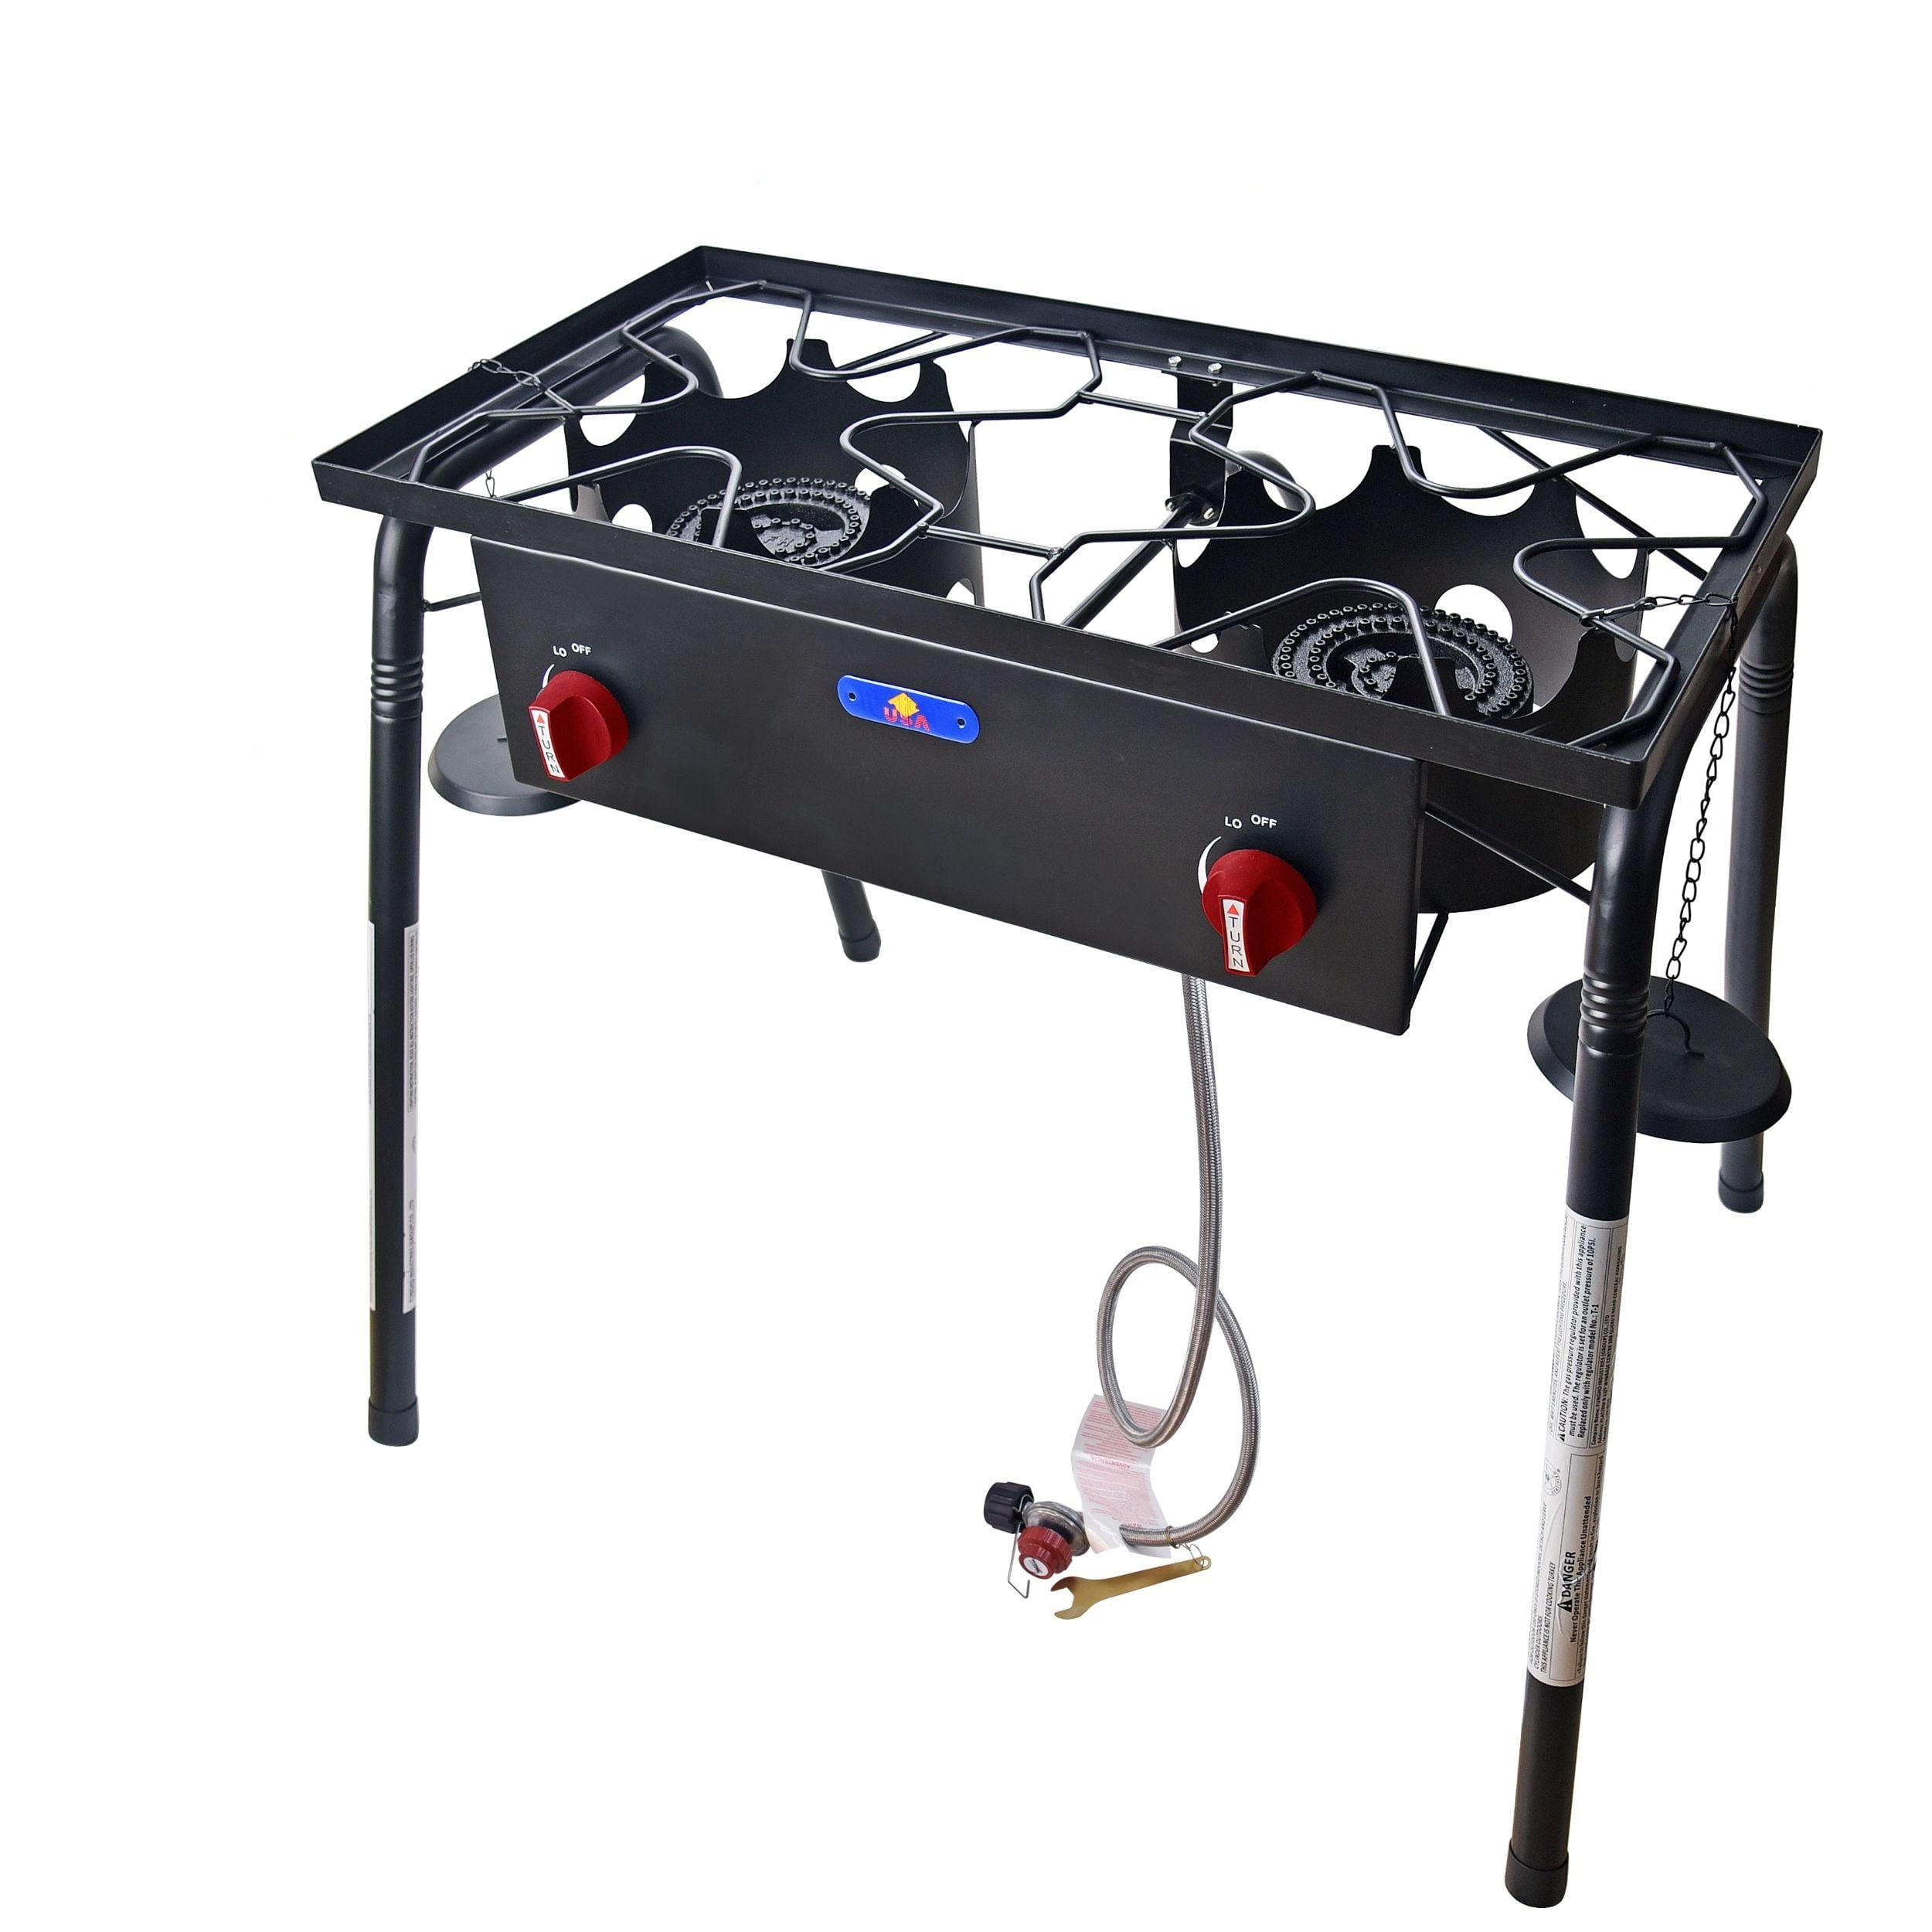 HIGH QUALITY DOUBLE BURNER PORTABLE CAMPING STOVE AND GRILL GAS COOKER STOVE 